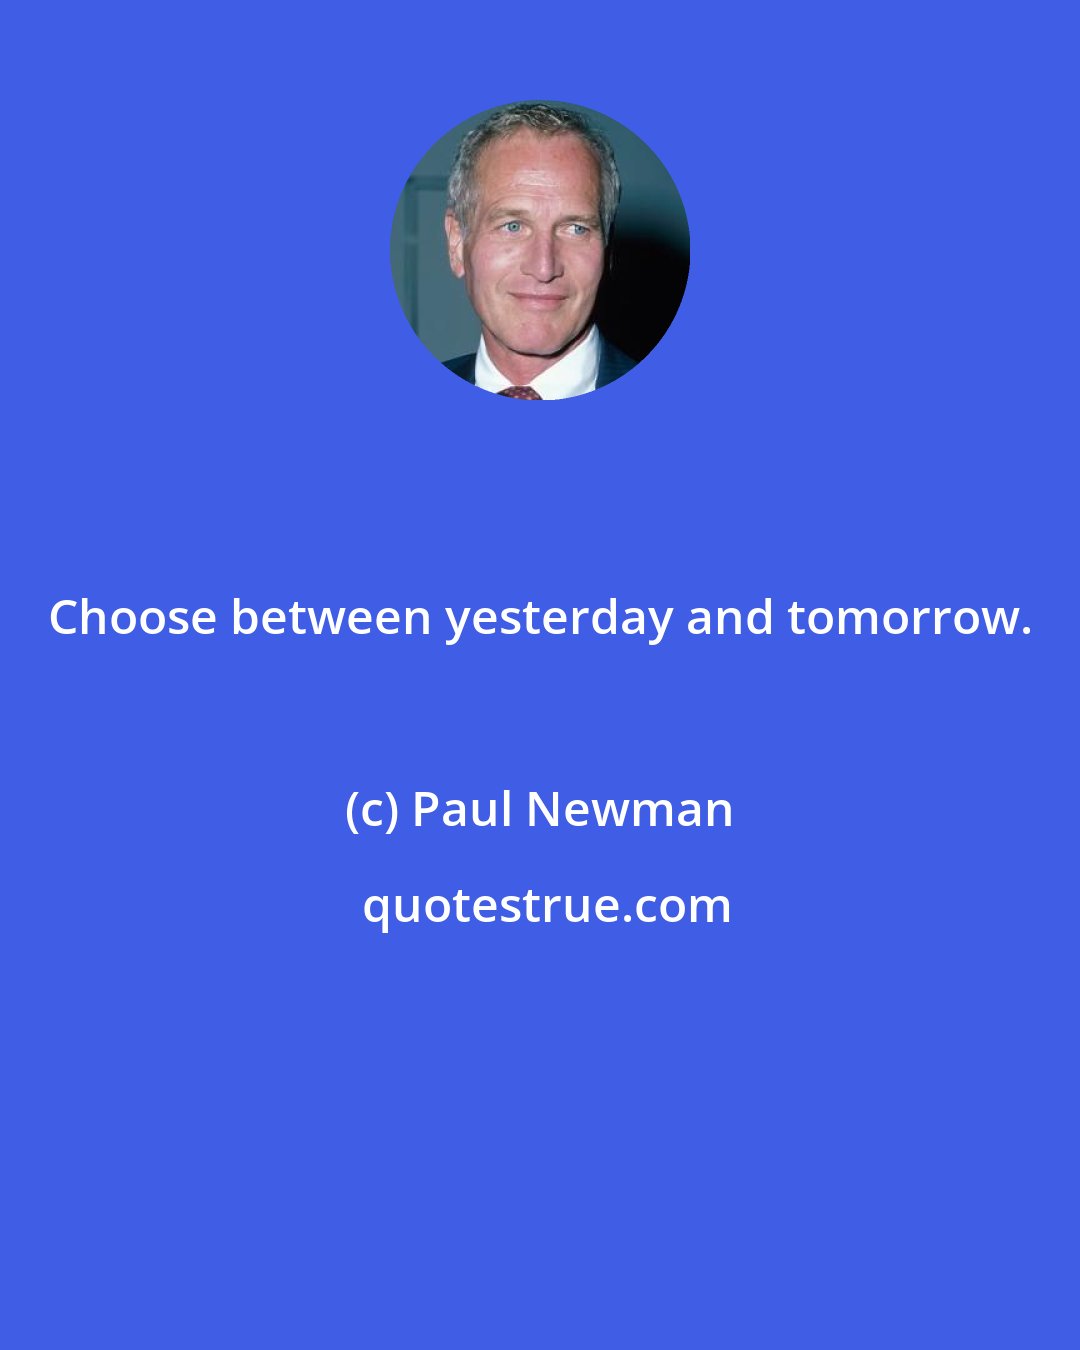 Paul Newman: Choose between yesterday and tomorrow.